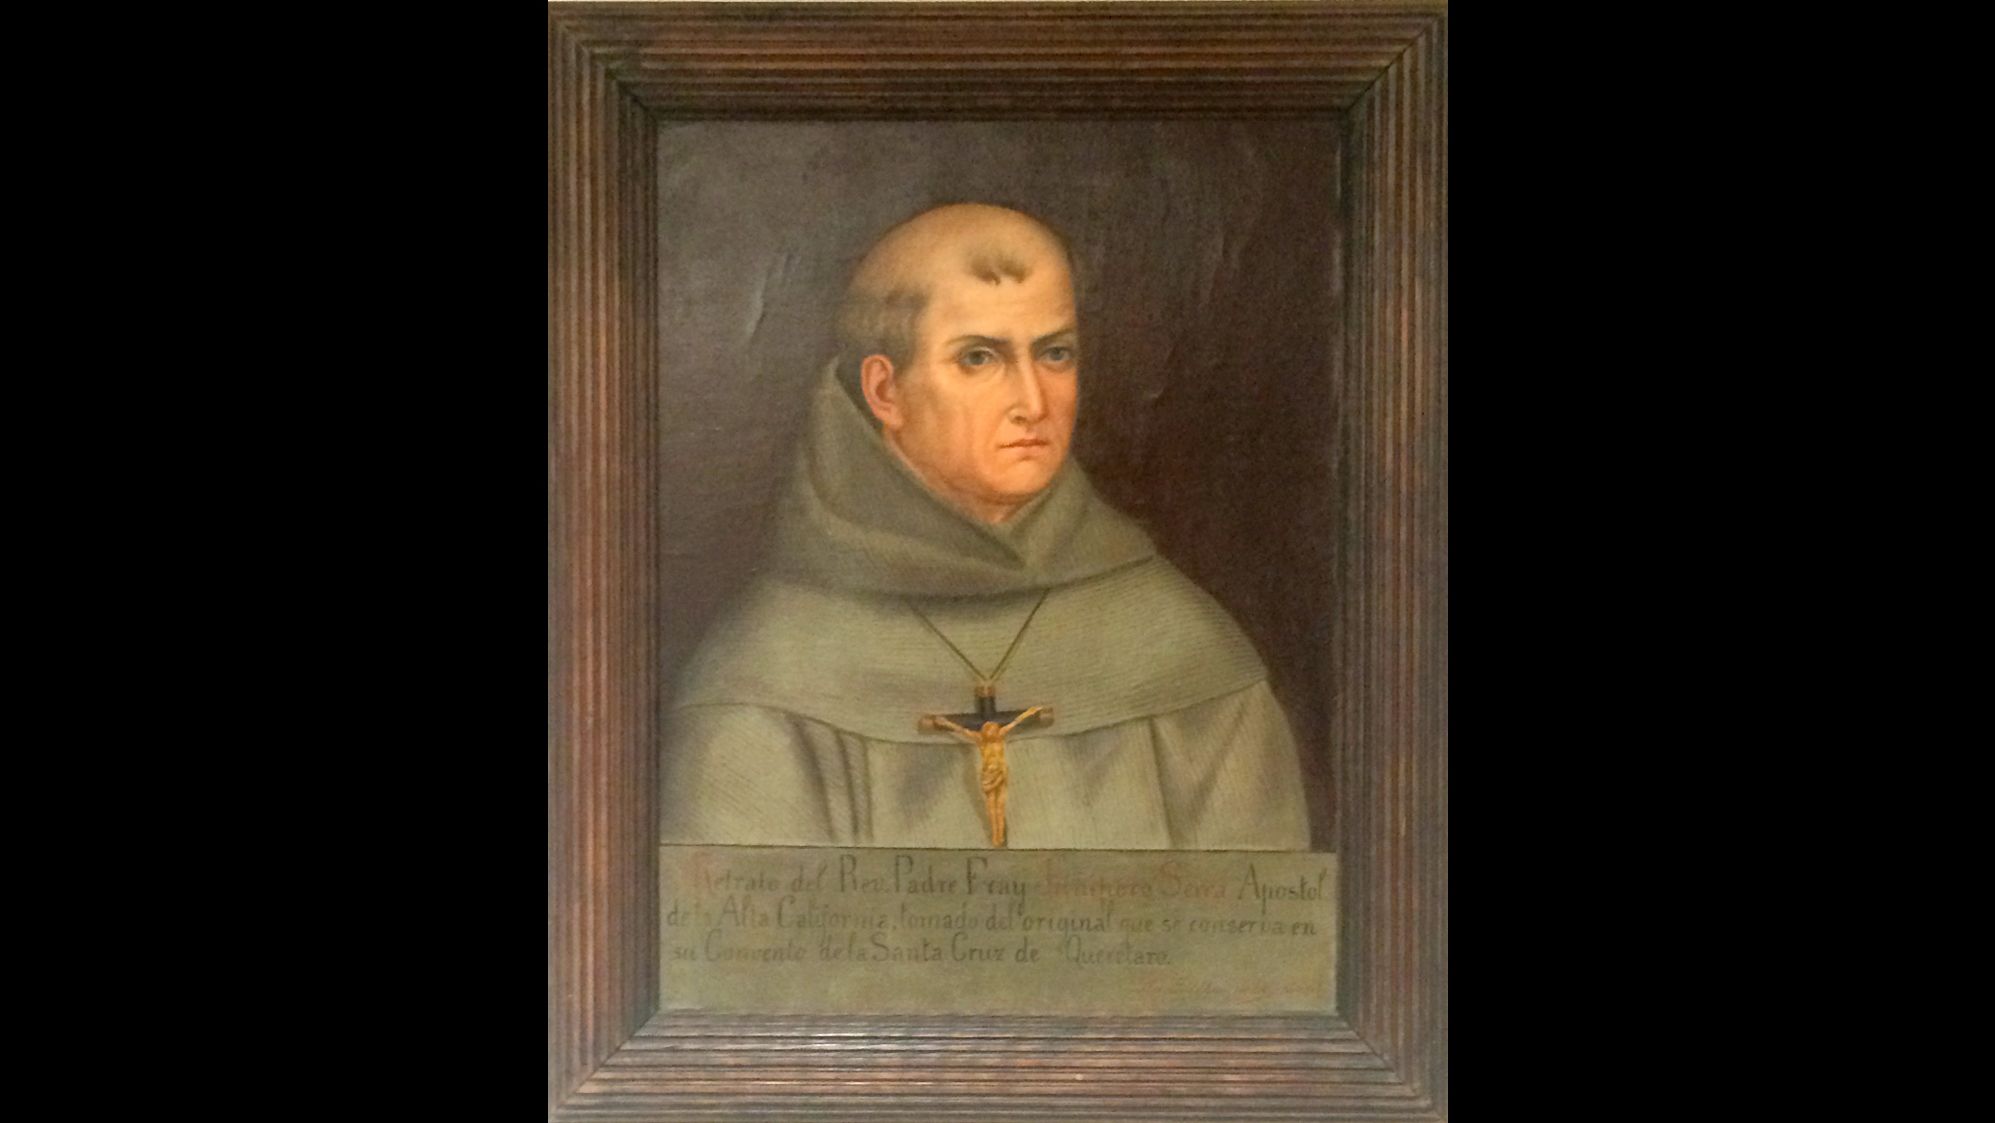 The only known portrait of Junipero Serra, painted in Mexico based on a description of him.